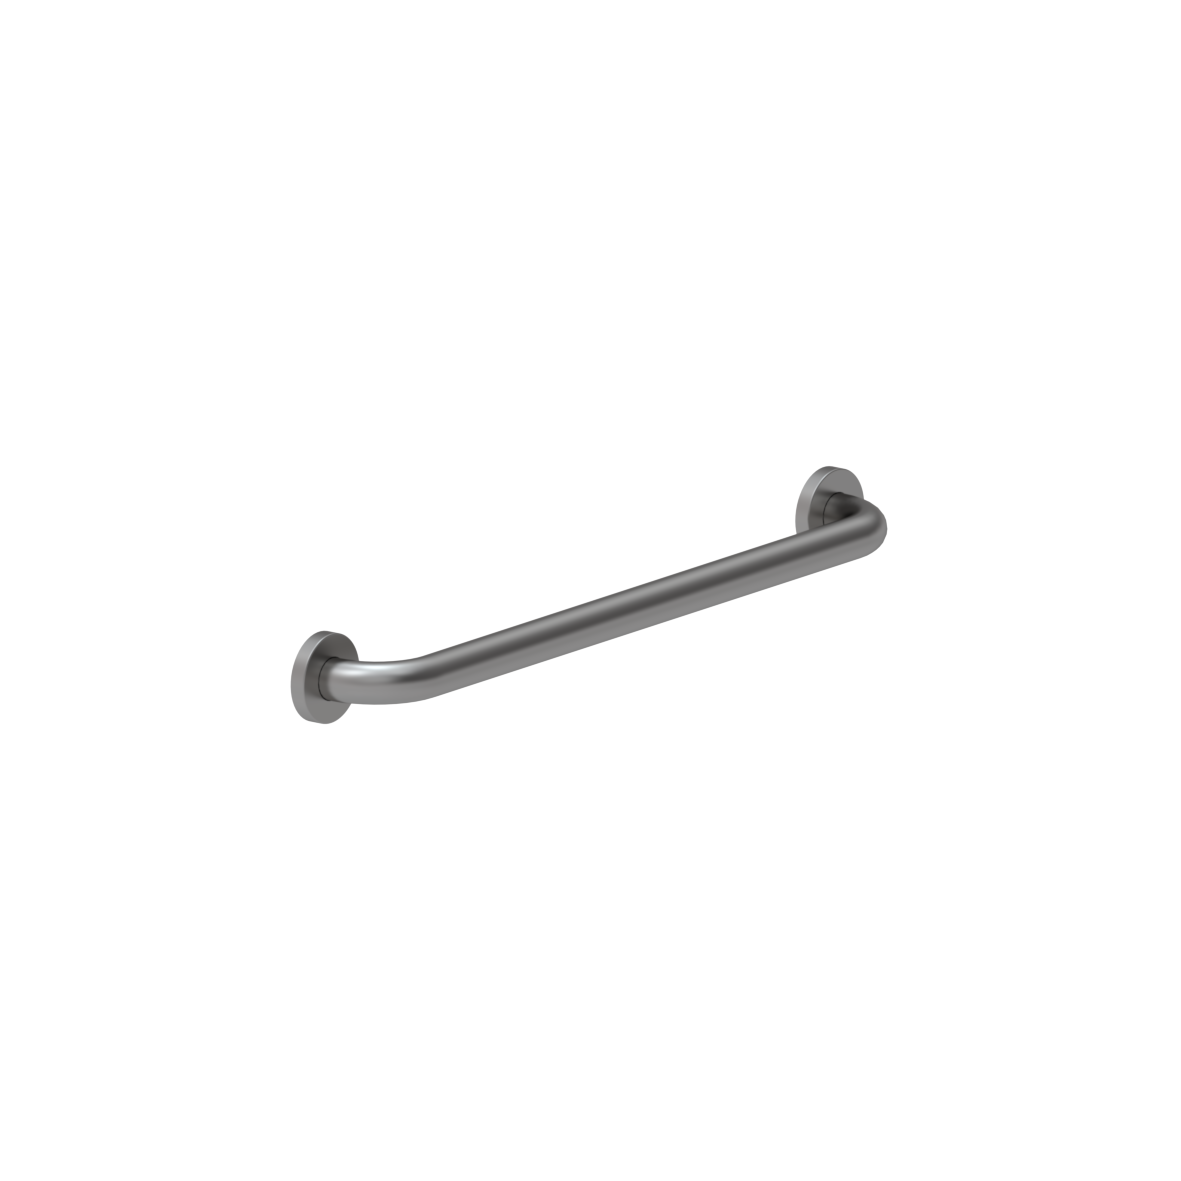 Inox Care Grab bar, left and right, 600 mm, Stainless steel